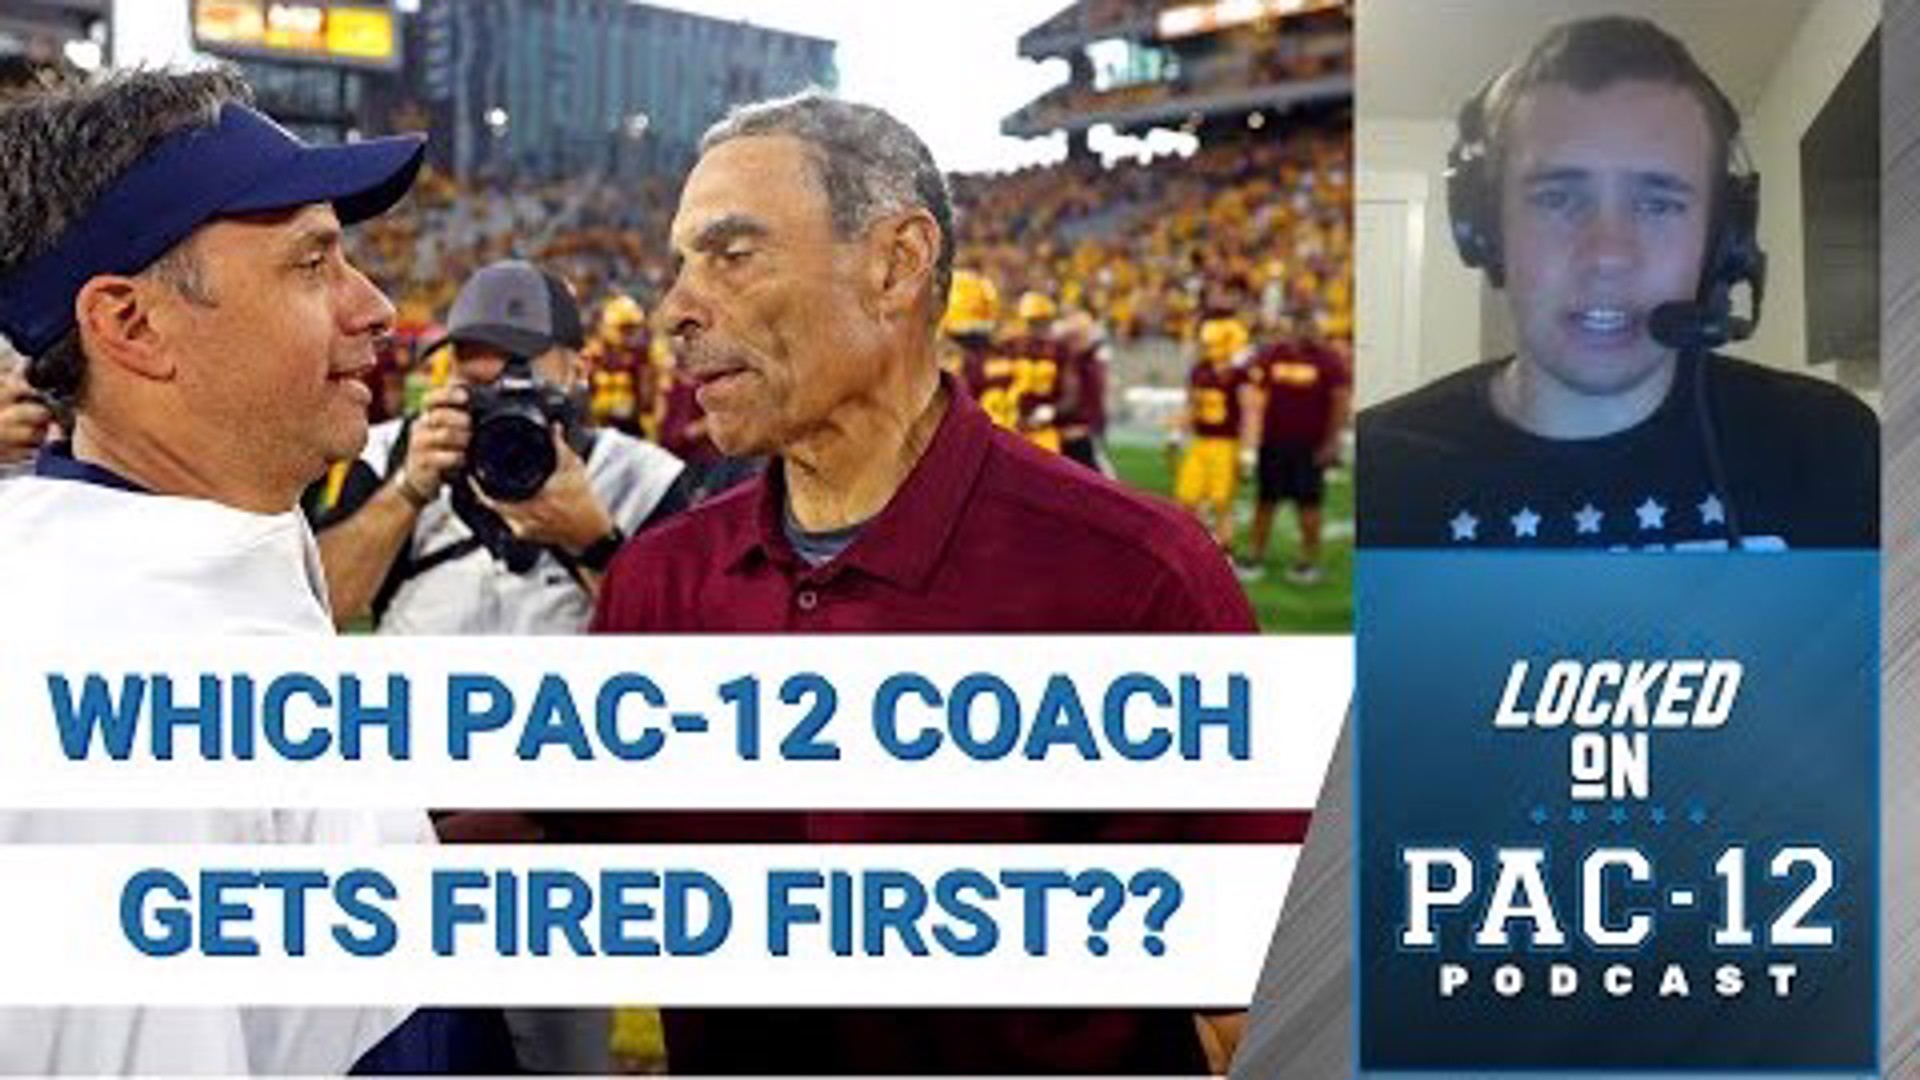 Which Pac-12 coach gets fired first? | Locked on Pac-12 